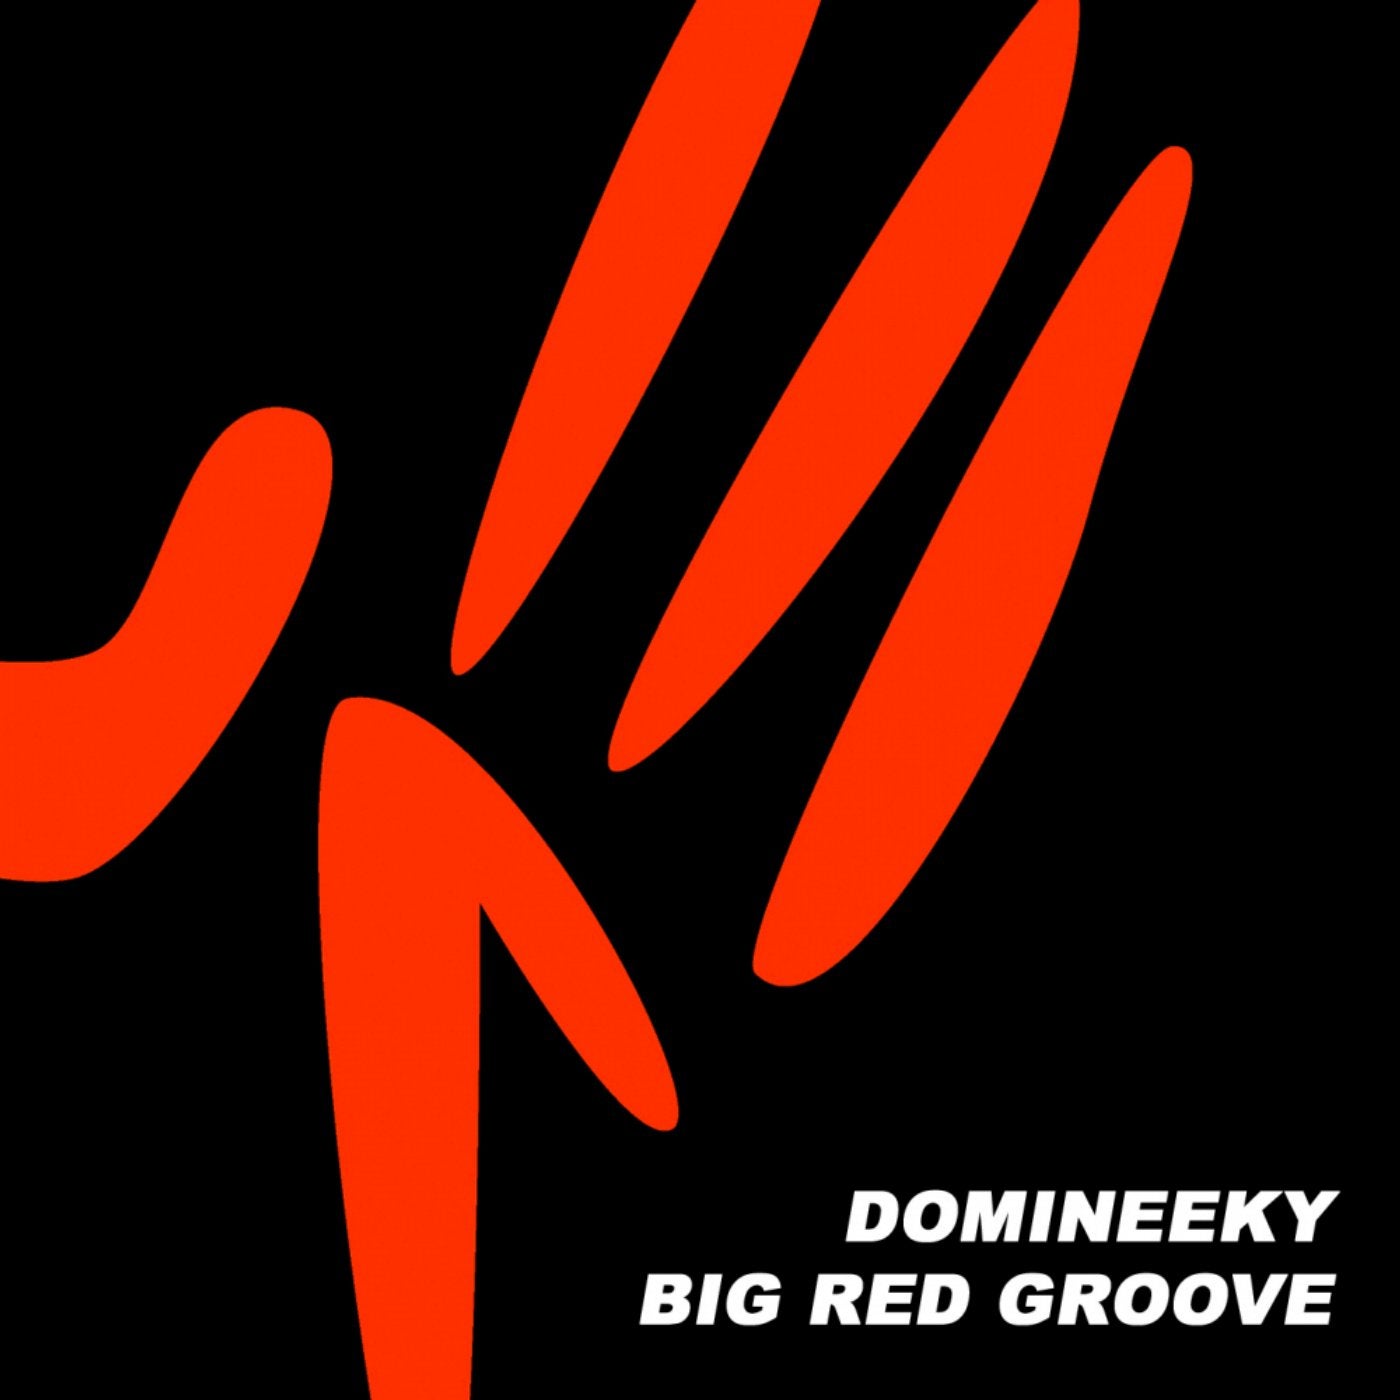 Big Red Groove